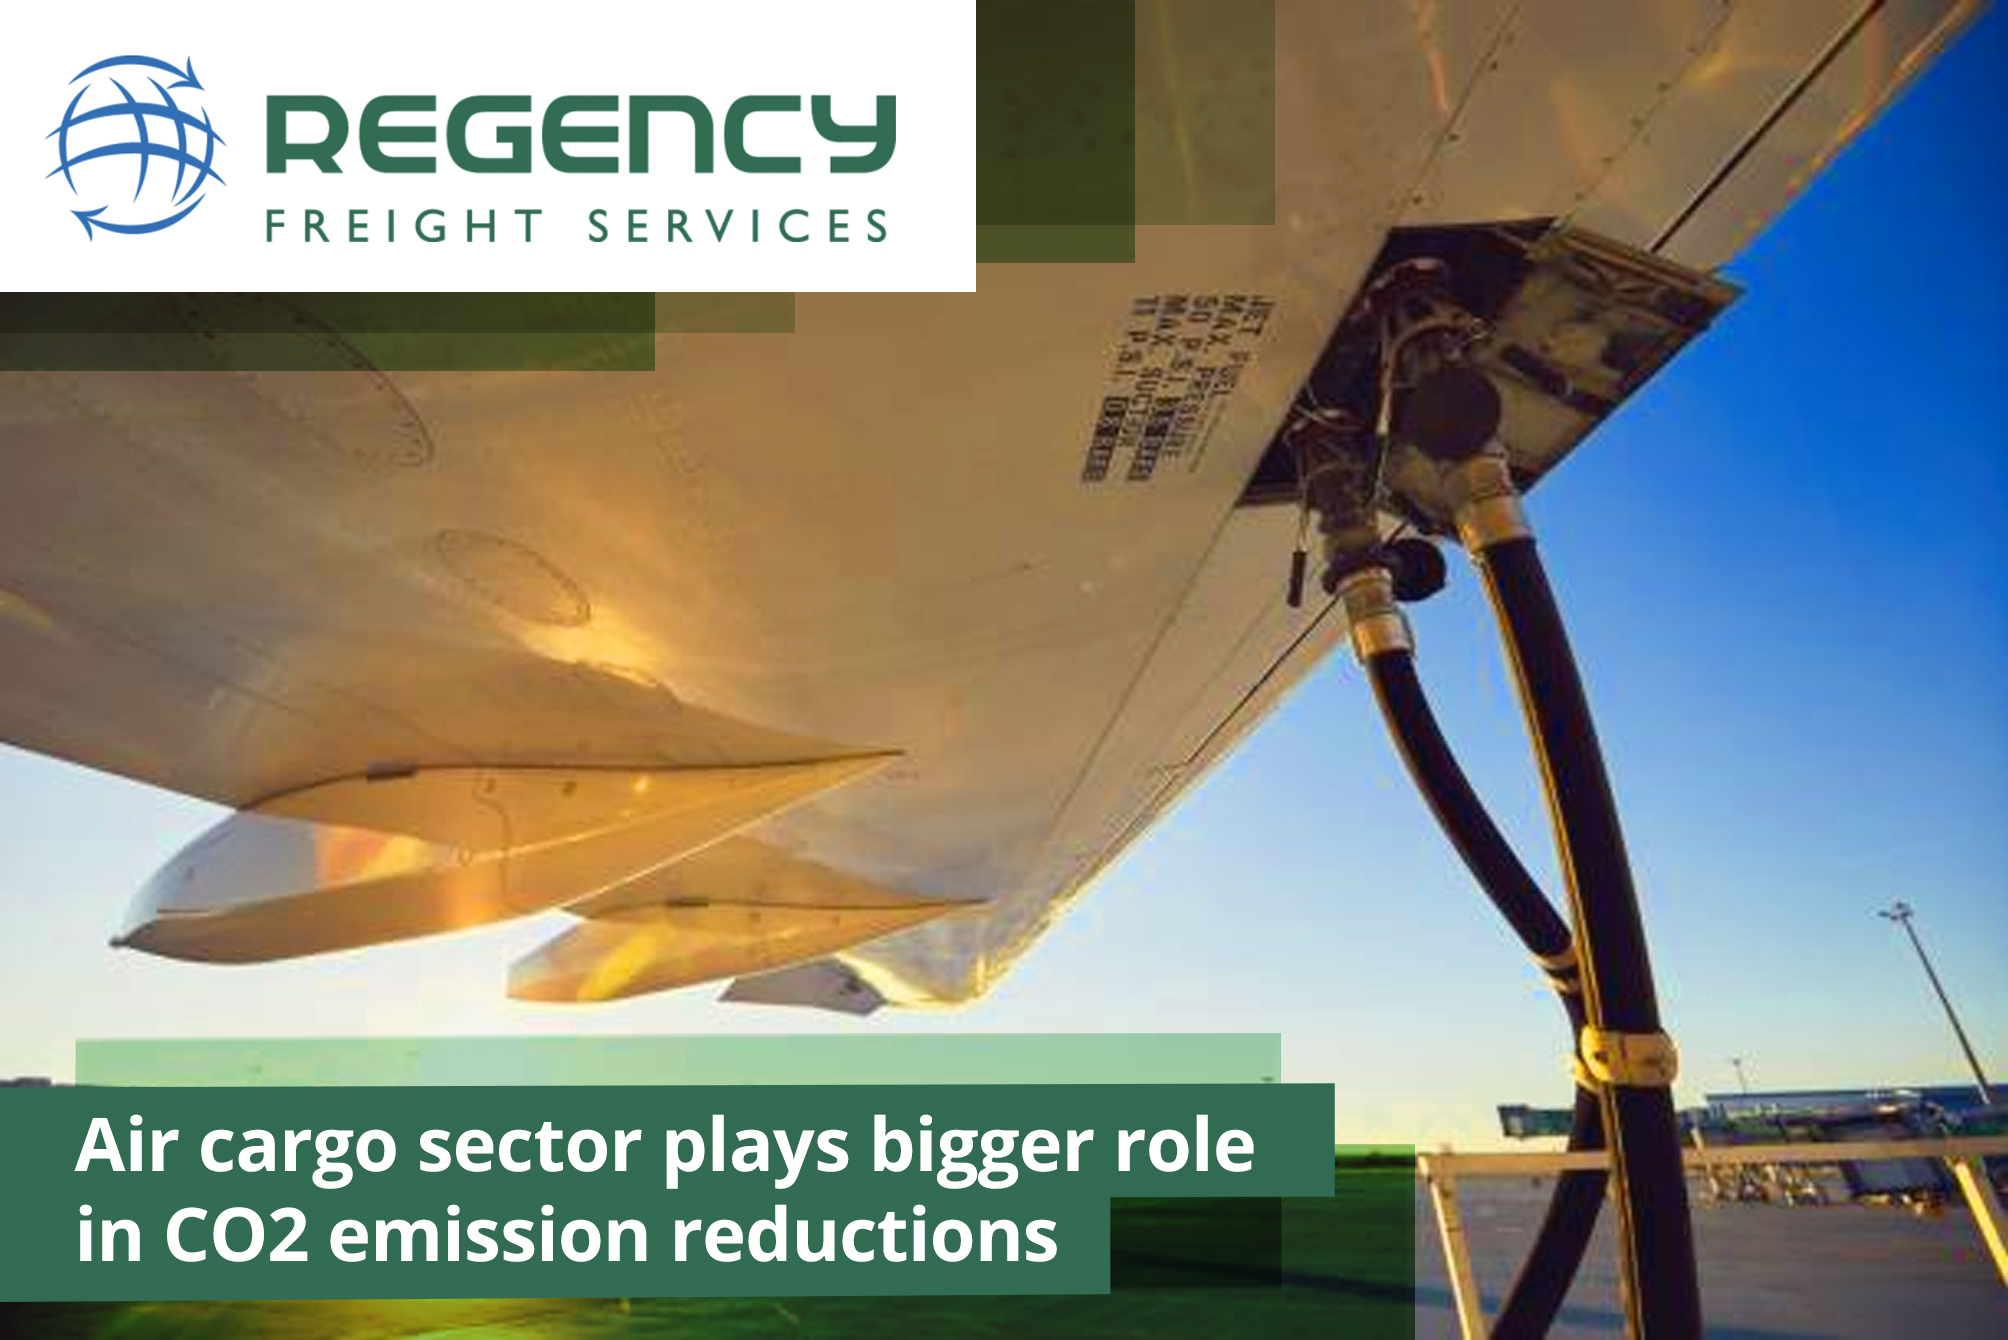 Air cargo sector plays bigger role in CO2 emission reductions